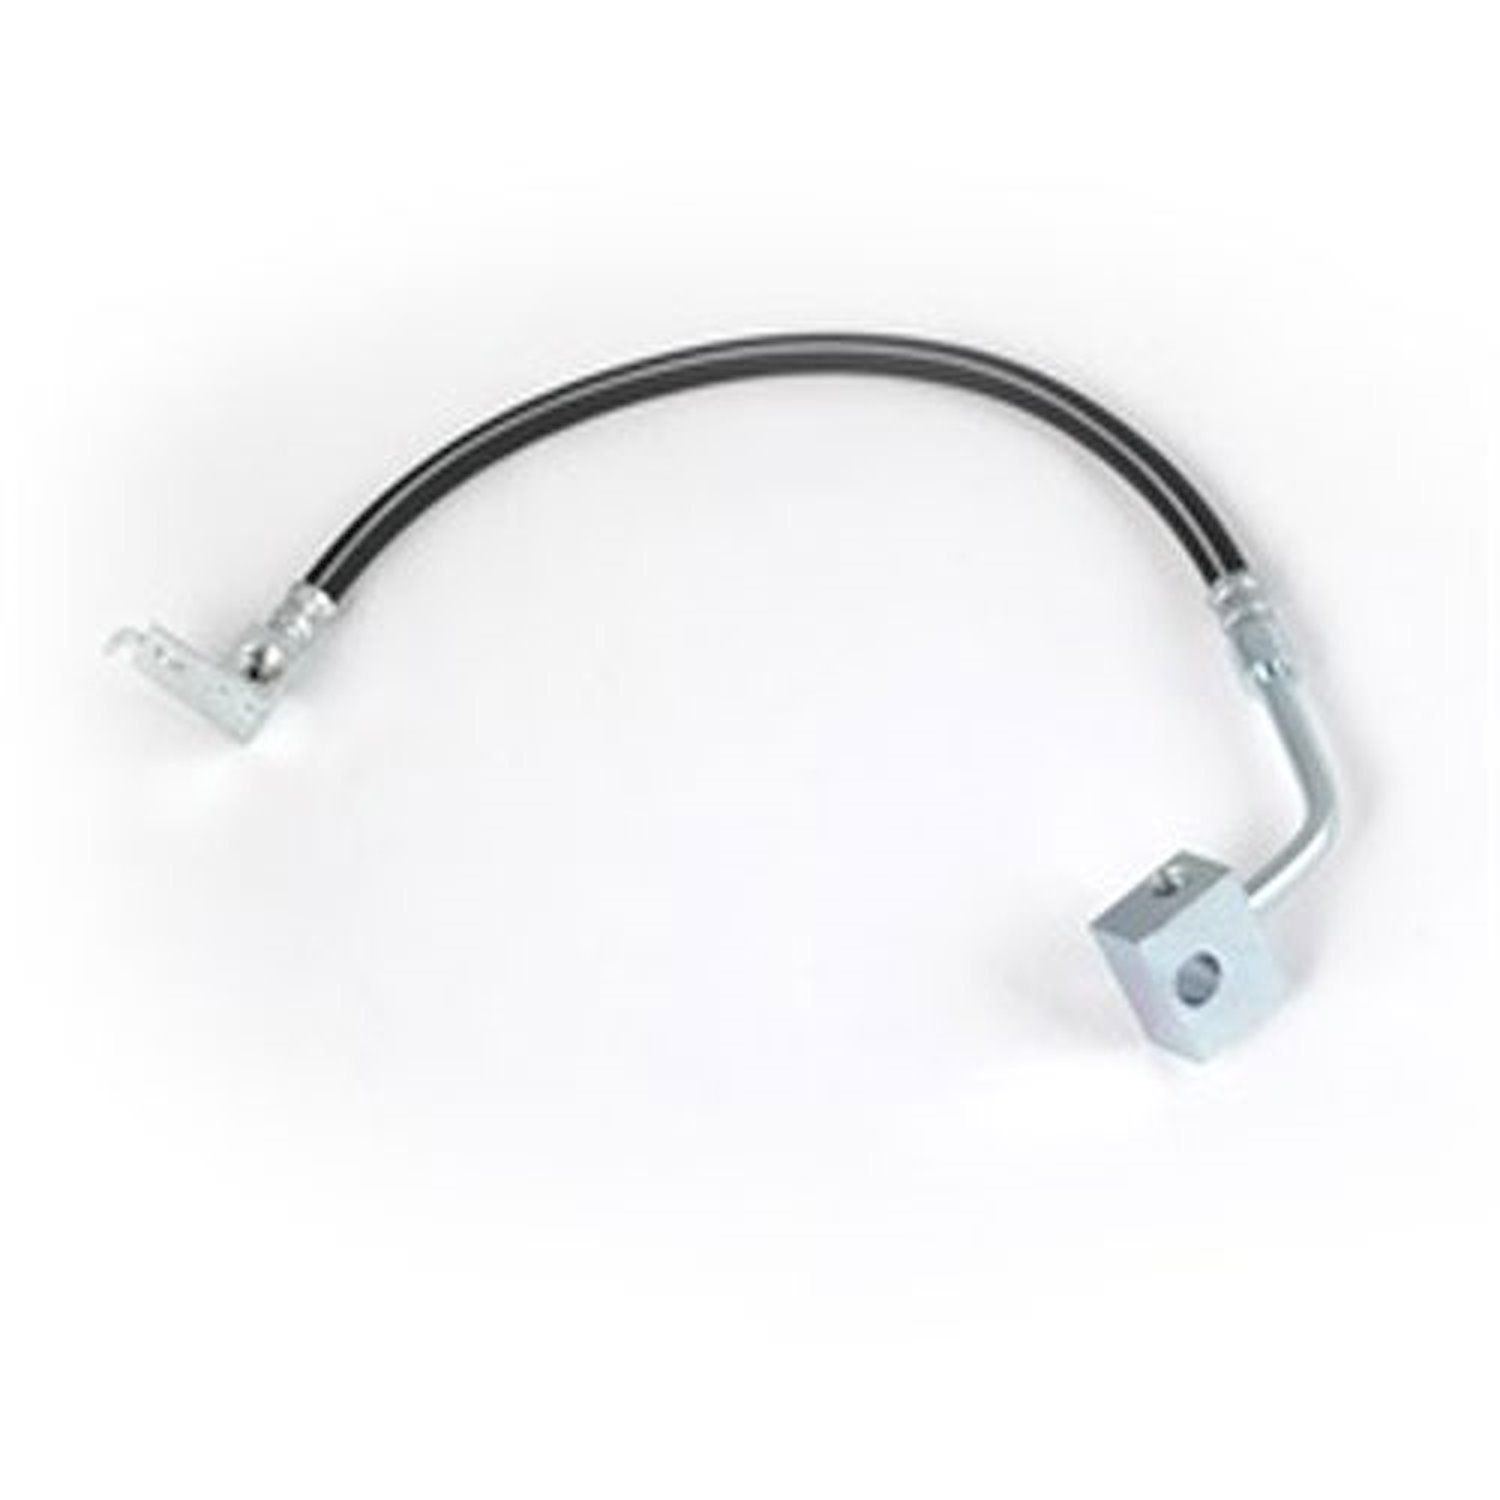 This center rear brake hose from Omix-ADA fits